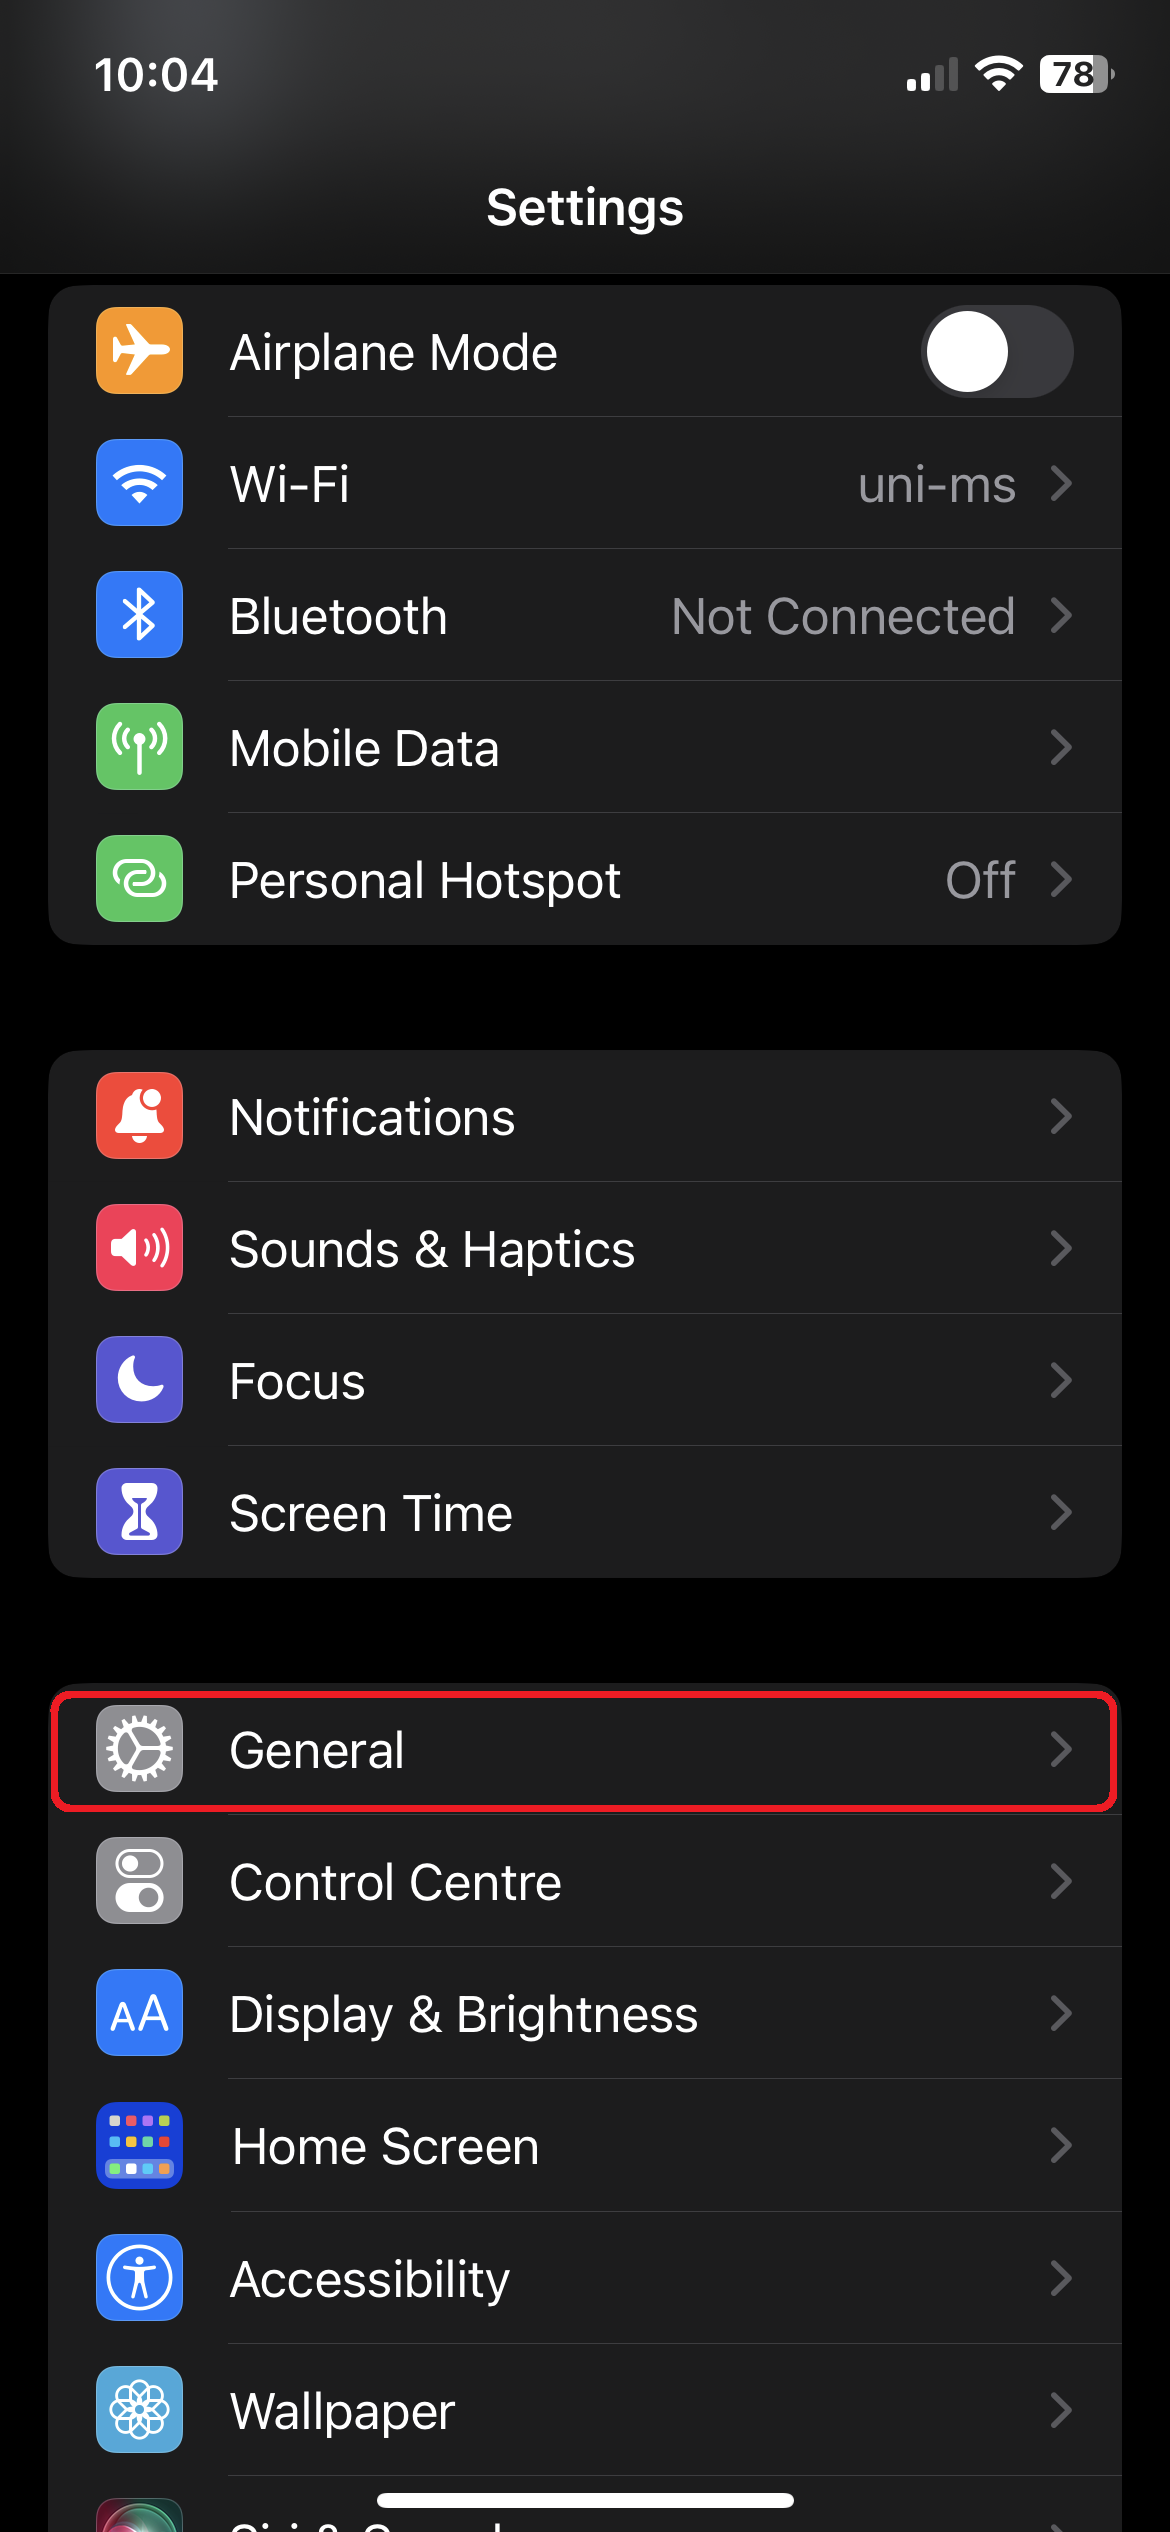 1. Open the Settings and Tap General